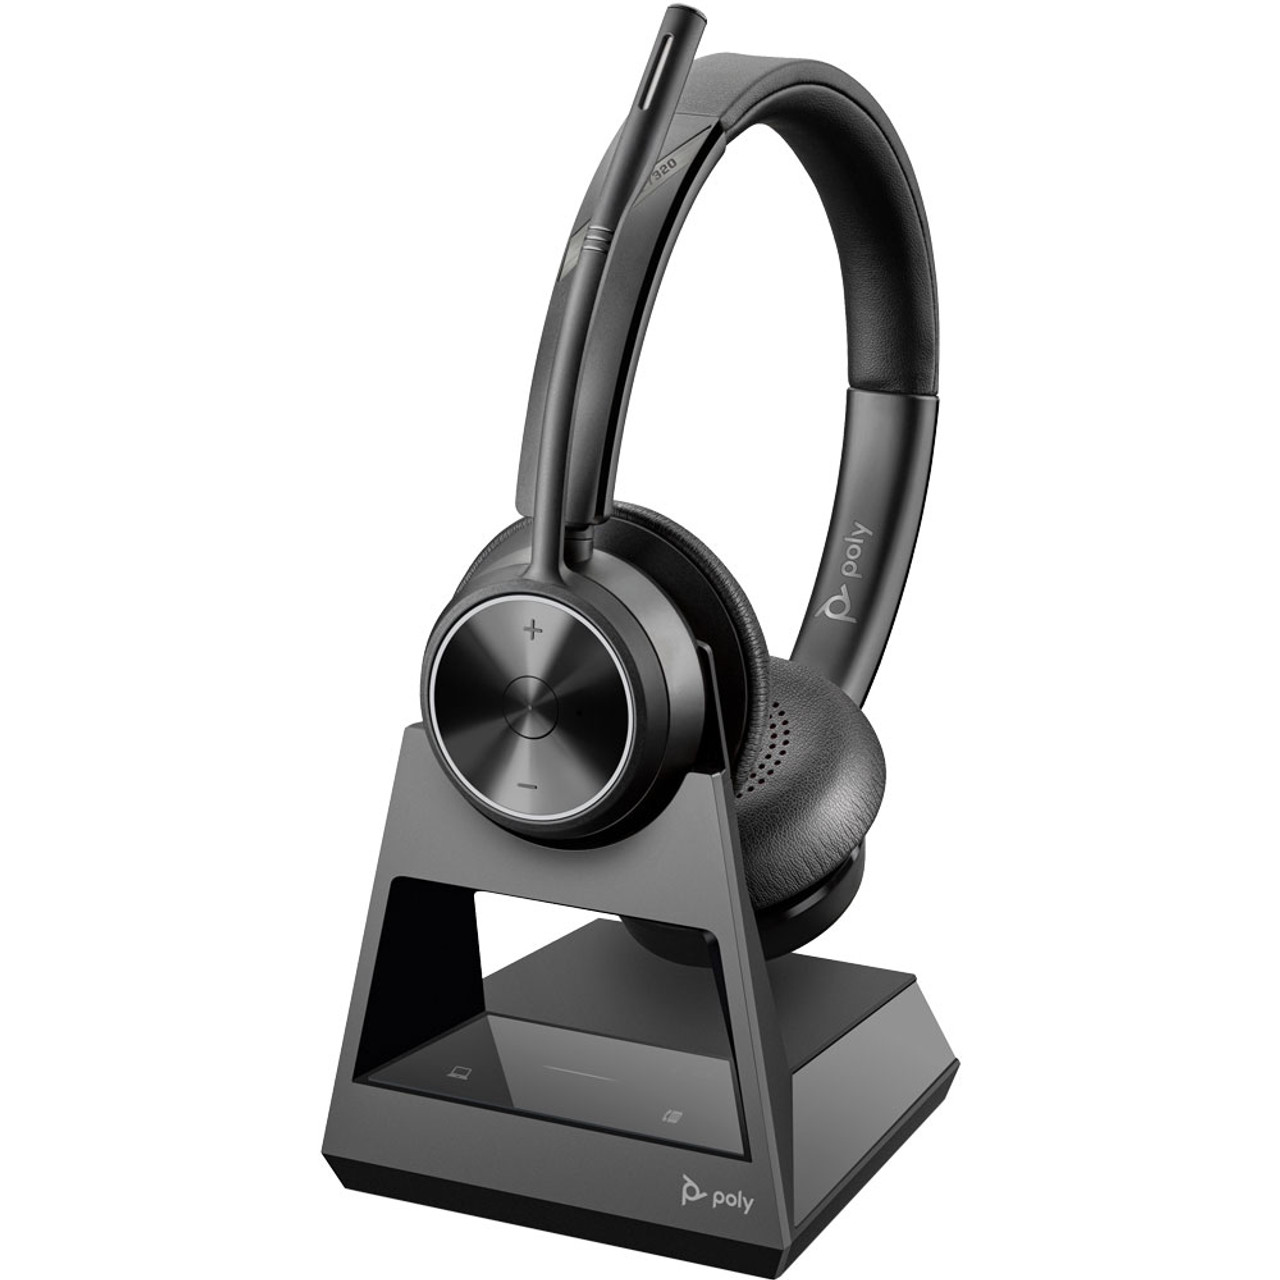 Poly Savi 7320 Office Stereo DECT Wireless Headset - 214777-01